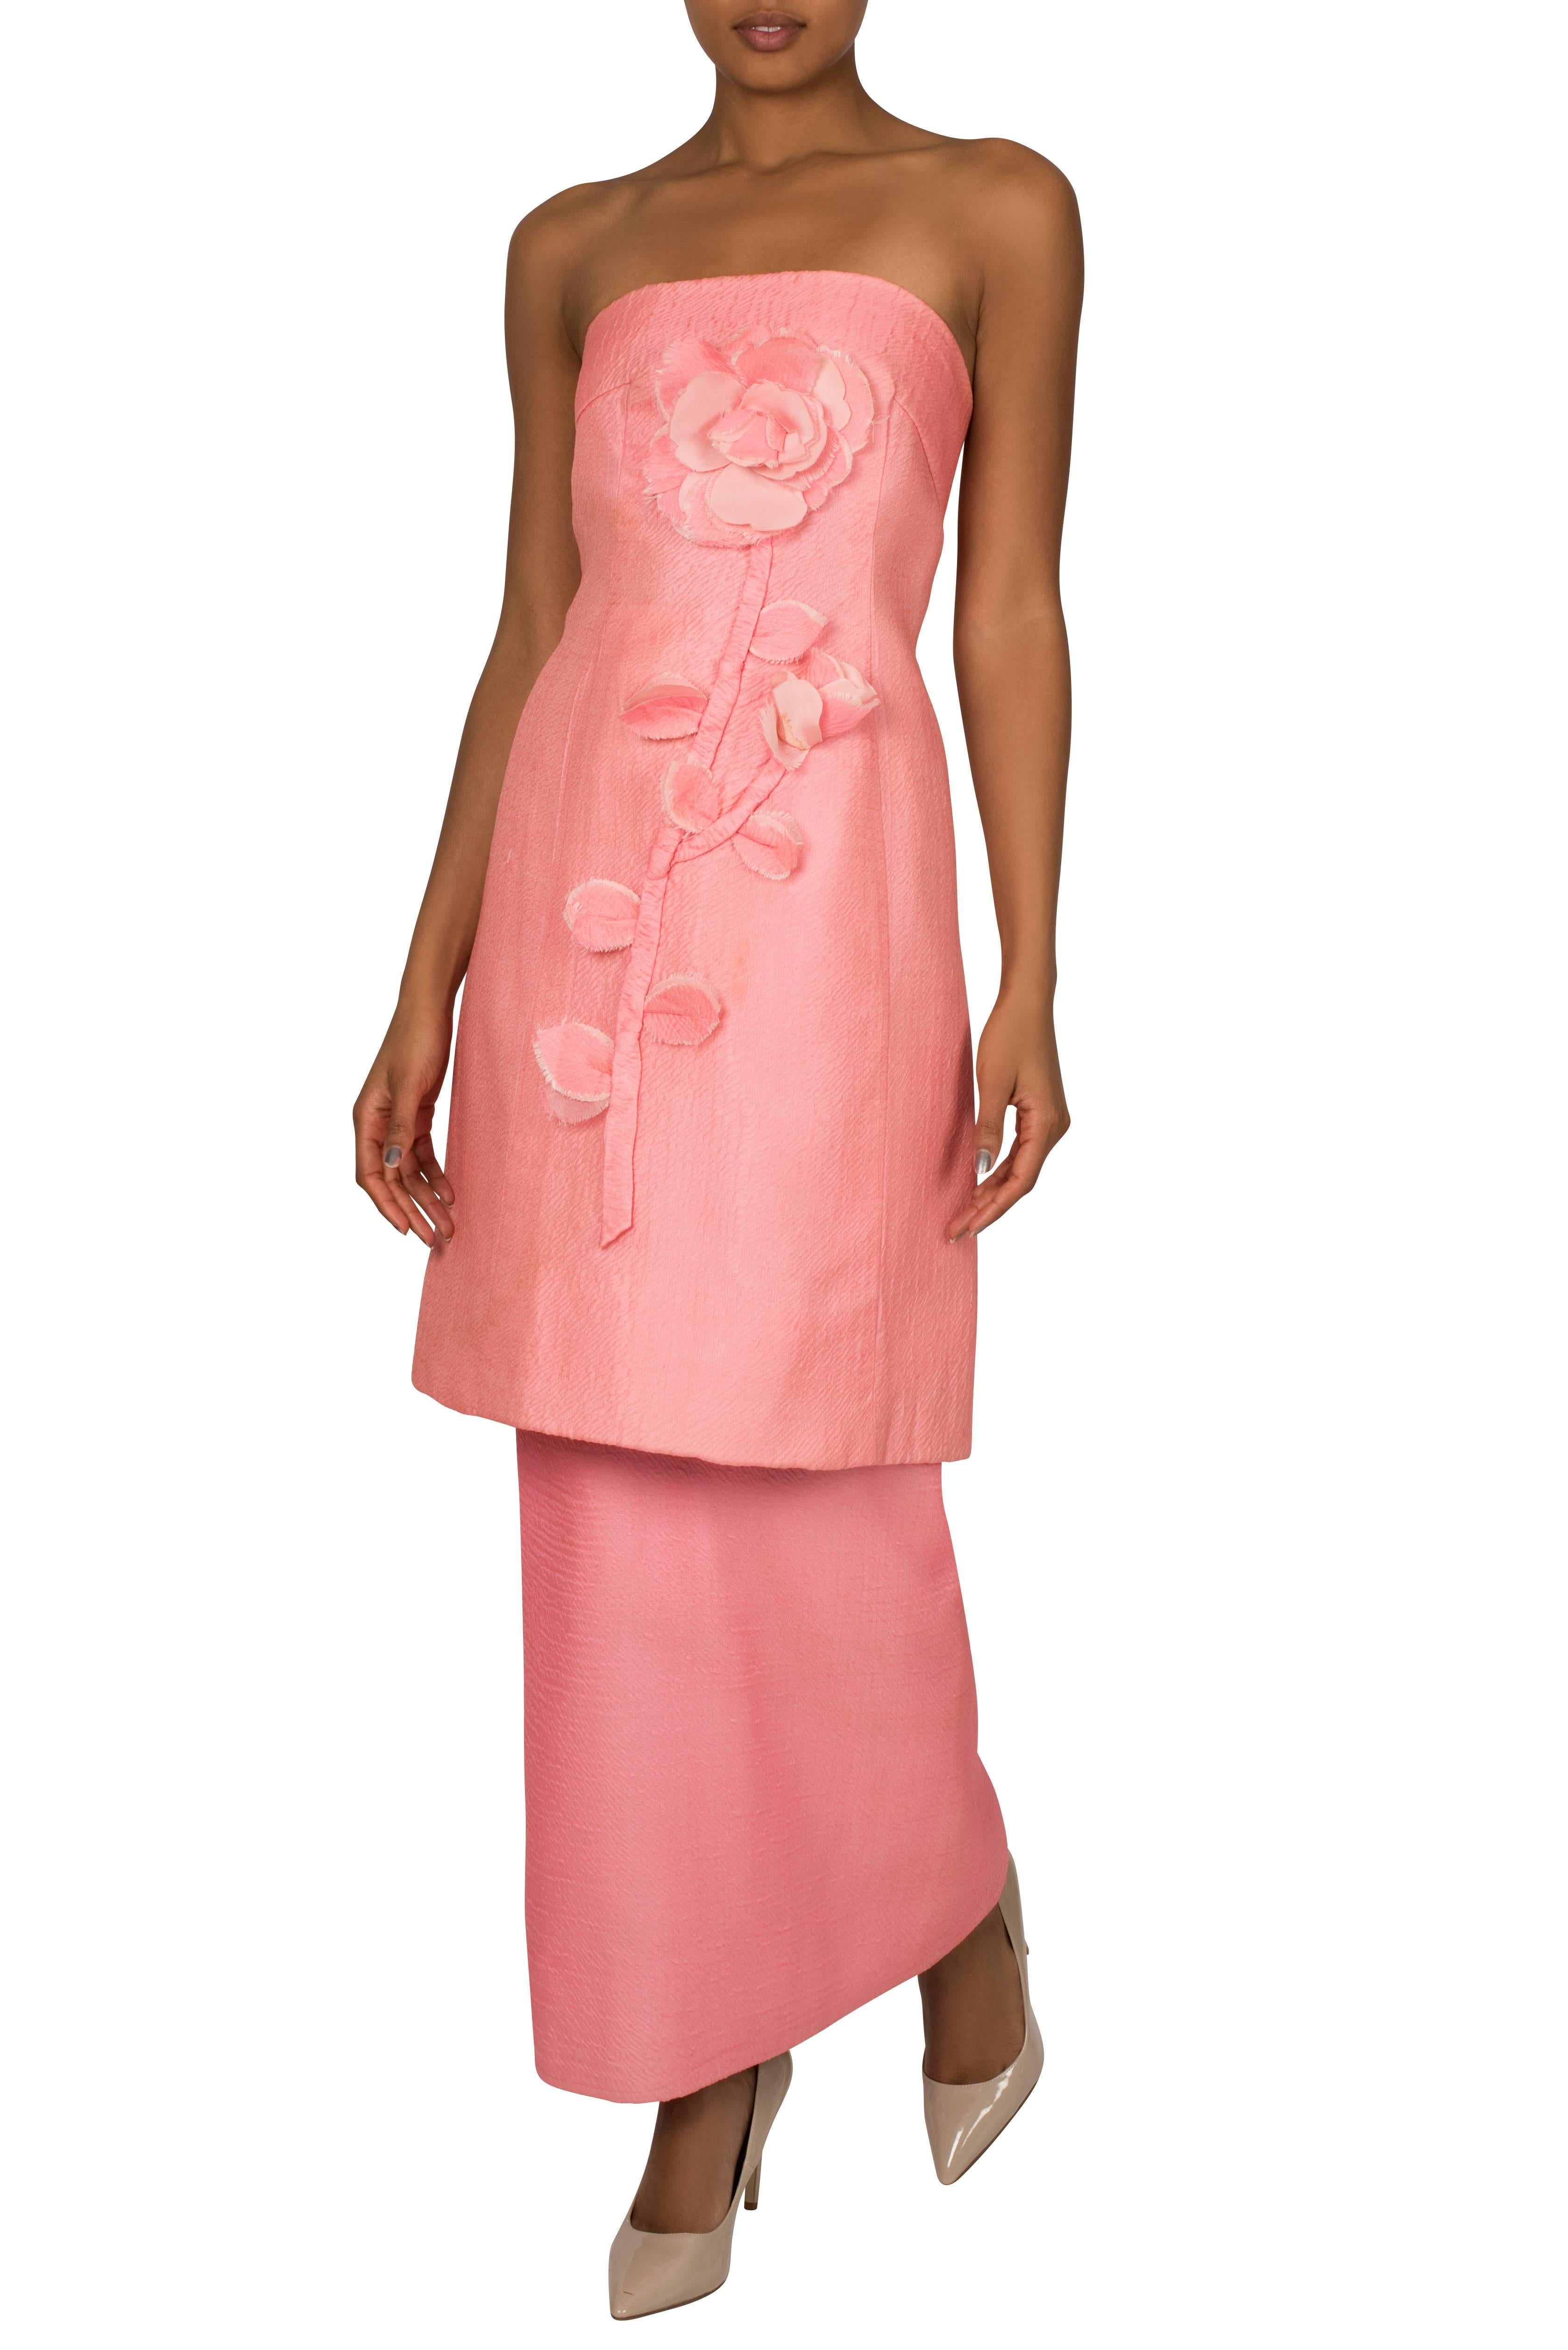 A short strapless rose pink cocktail dress by London society couturier Harald which includes an optional underskirt in order to transform it into a tiered full-length gown. Constructed from a textured polyester chiffon with a slight sheen, the